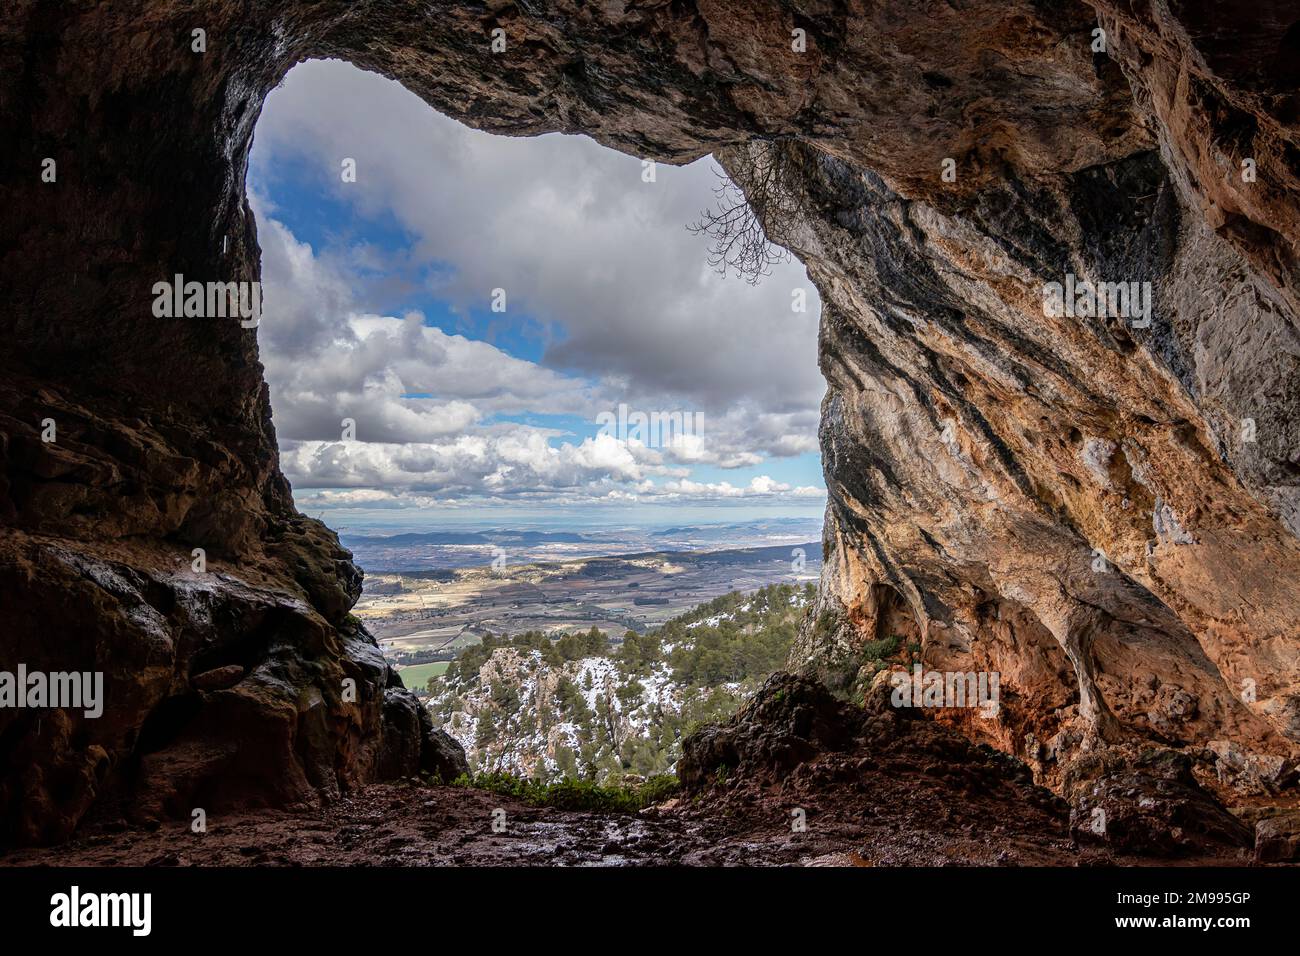 Bolumini cave from the inside, in the background a snowy landscape with blue sky. Mariola natural park ,Agres, Alicante, Spain. Stock Photo